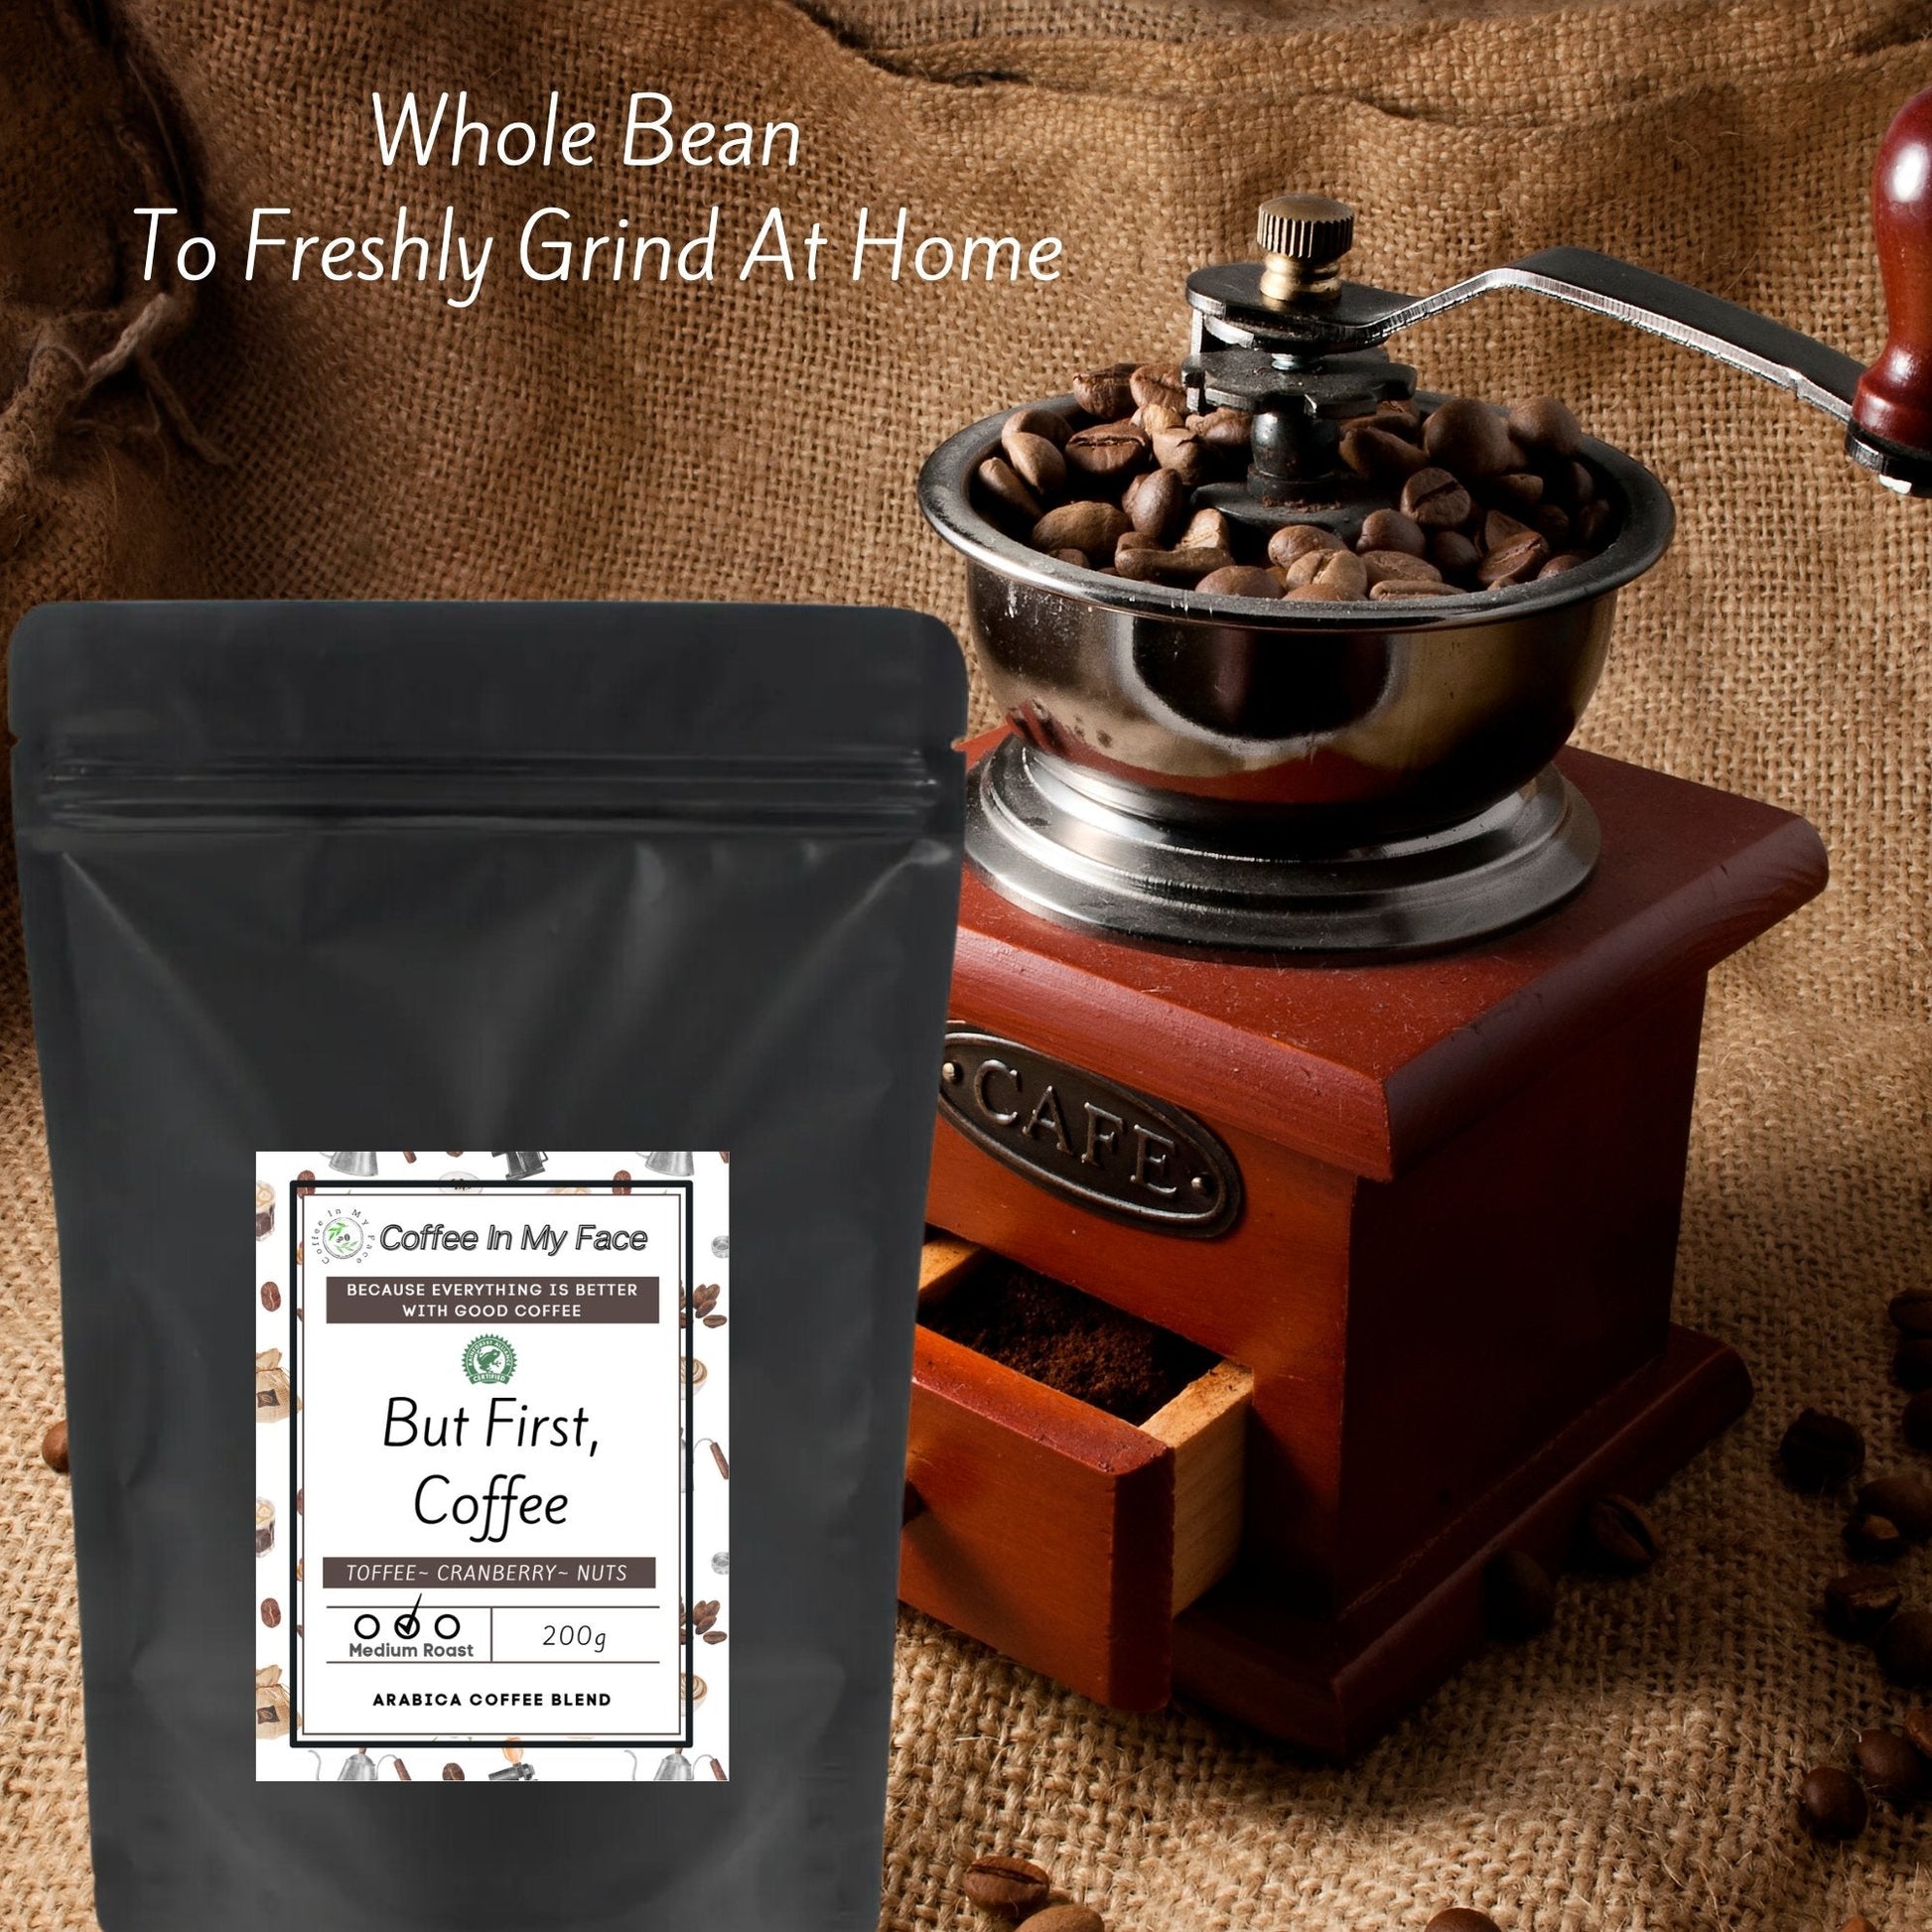 But First, Coffee - Medium Roasted - Coffee Blend - 200g - Blend-Coffee In My Face LTD